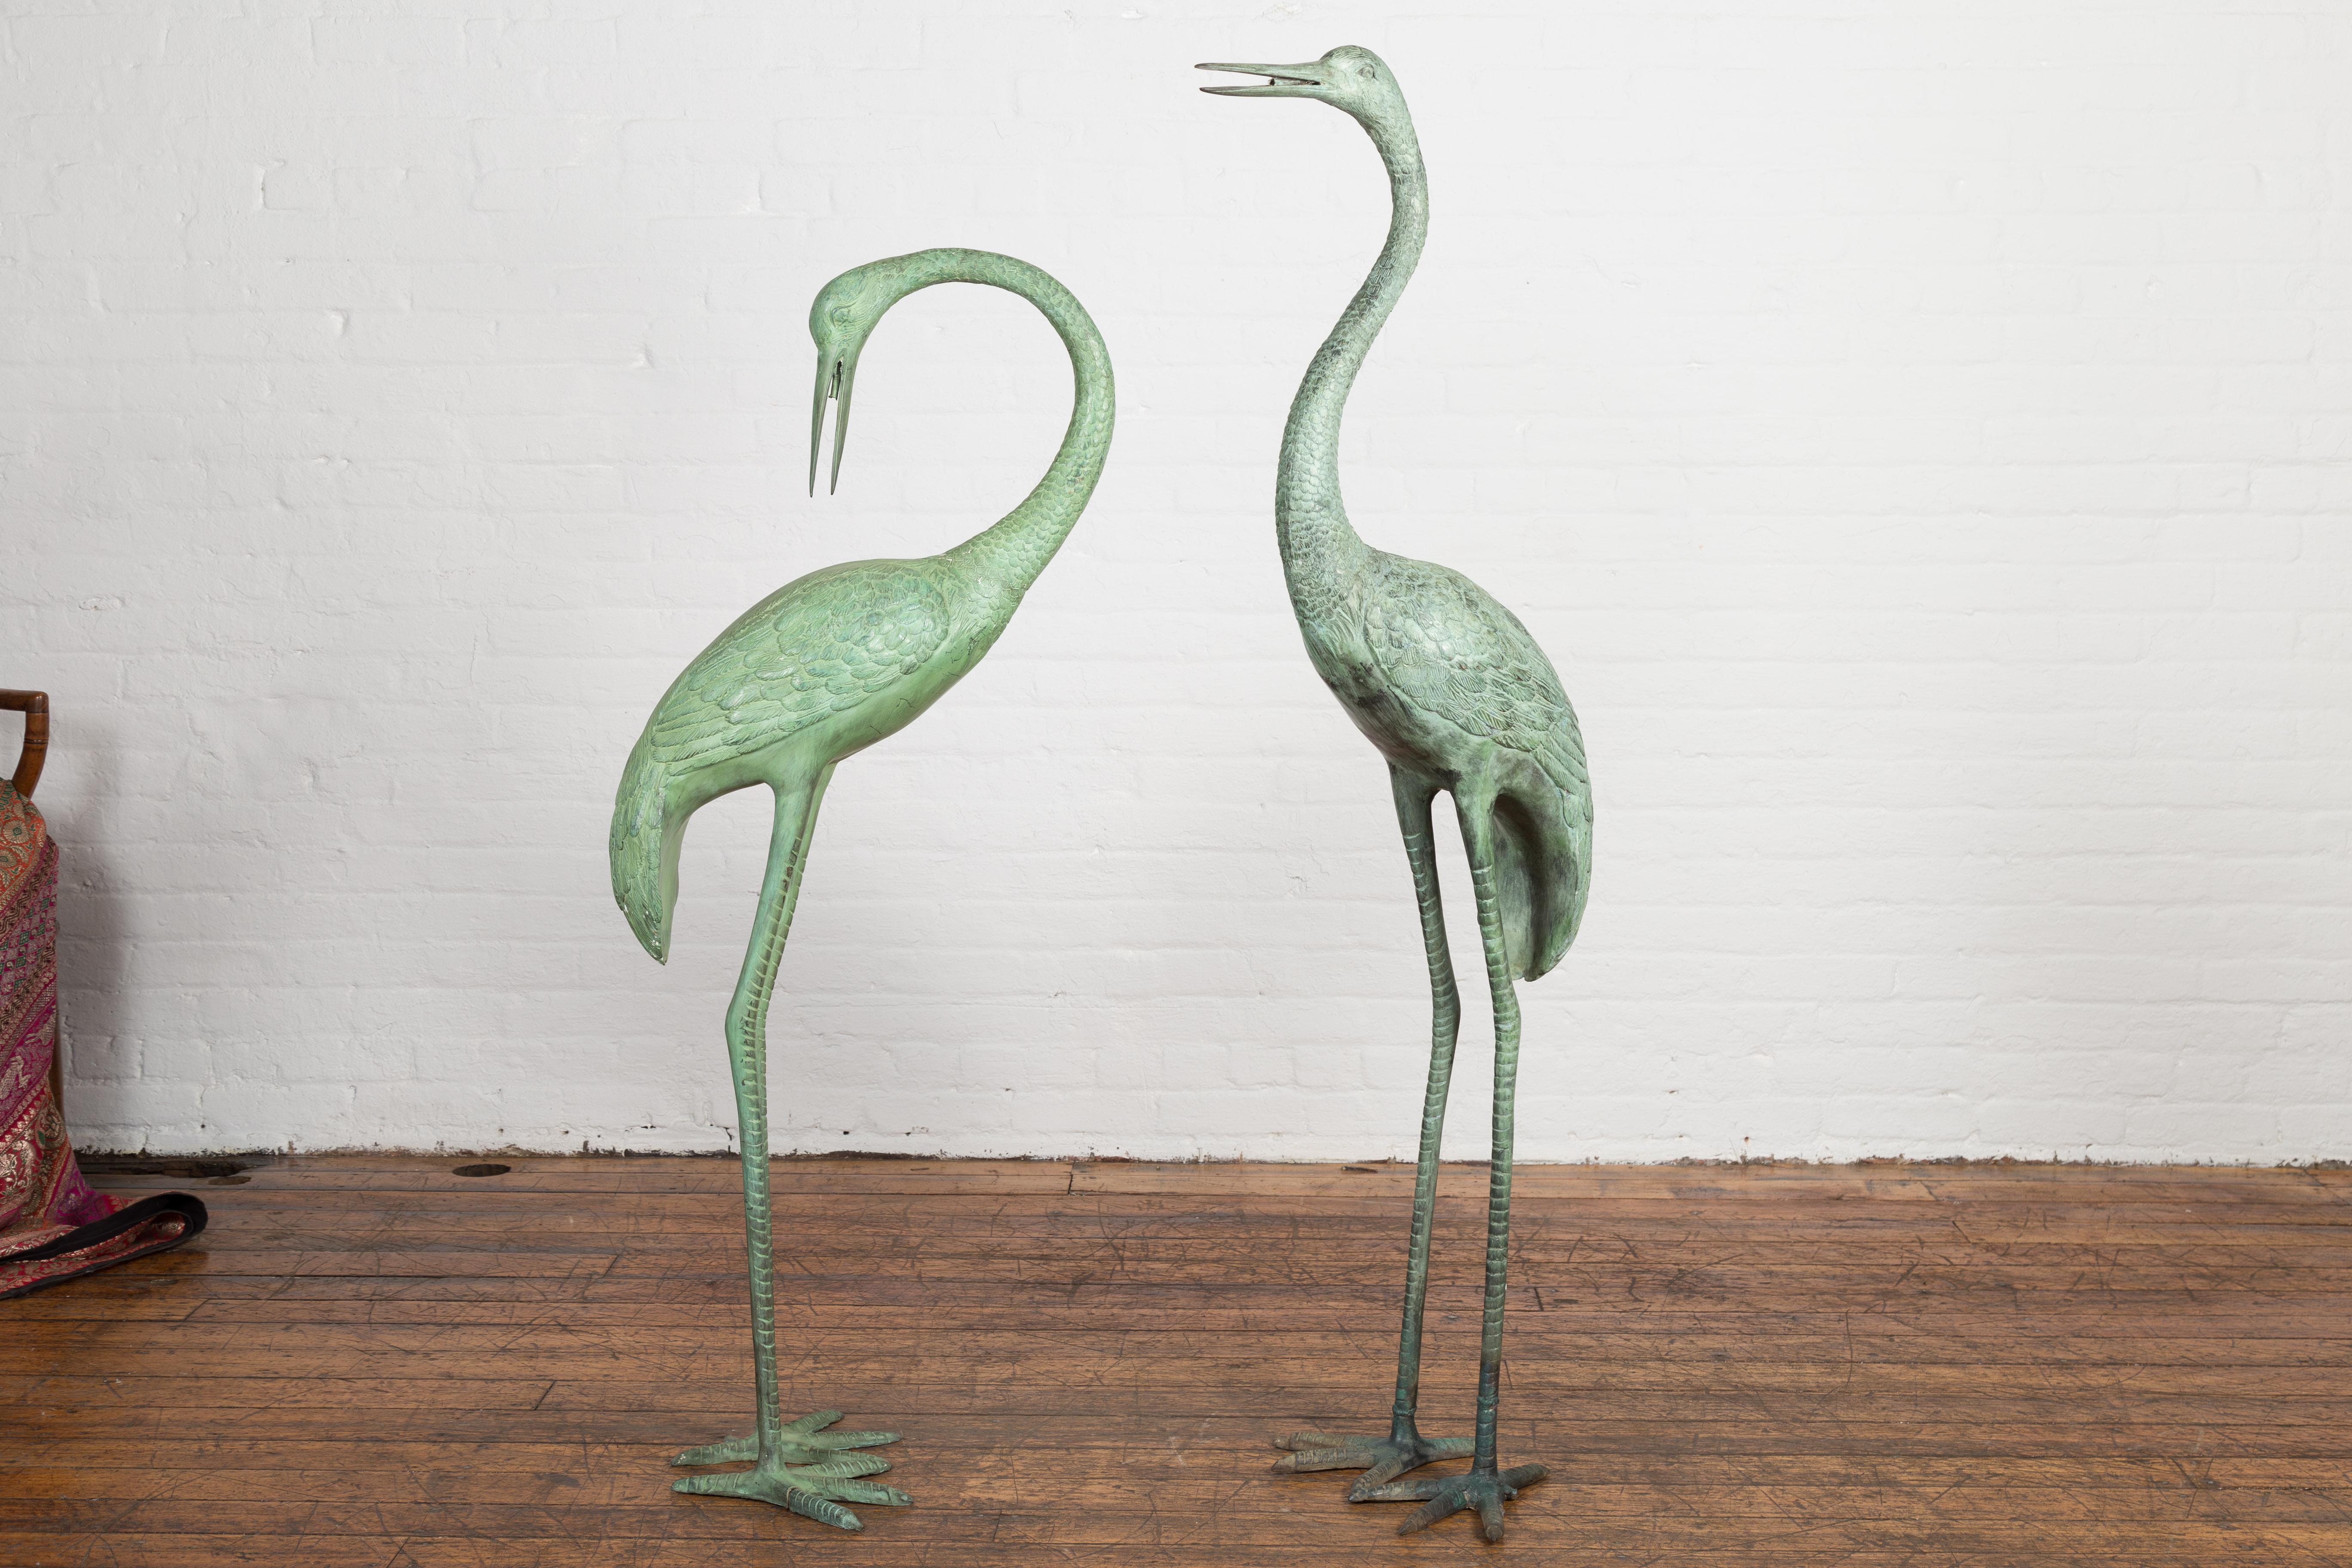 A pair of custom made lost wax cast bronze crane sculptures with verdigris patina, tubed as fountains. This is a current production, the ones in the photos are available now. This pair of custom-made lost wax cast bronze crane sculptures exudes an